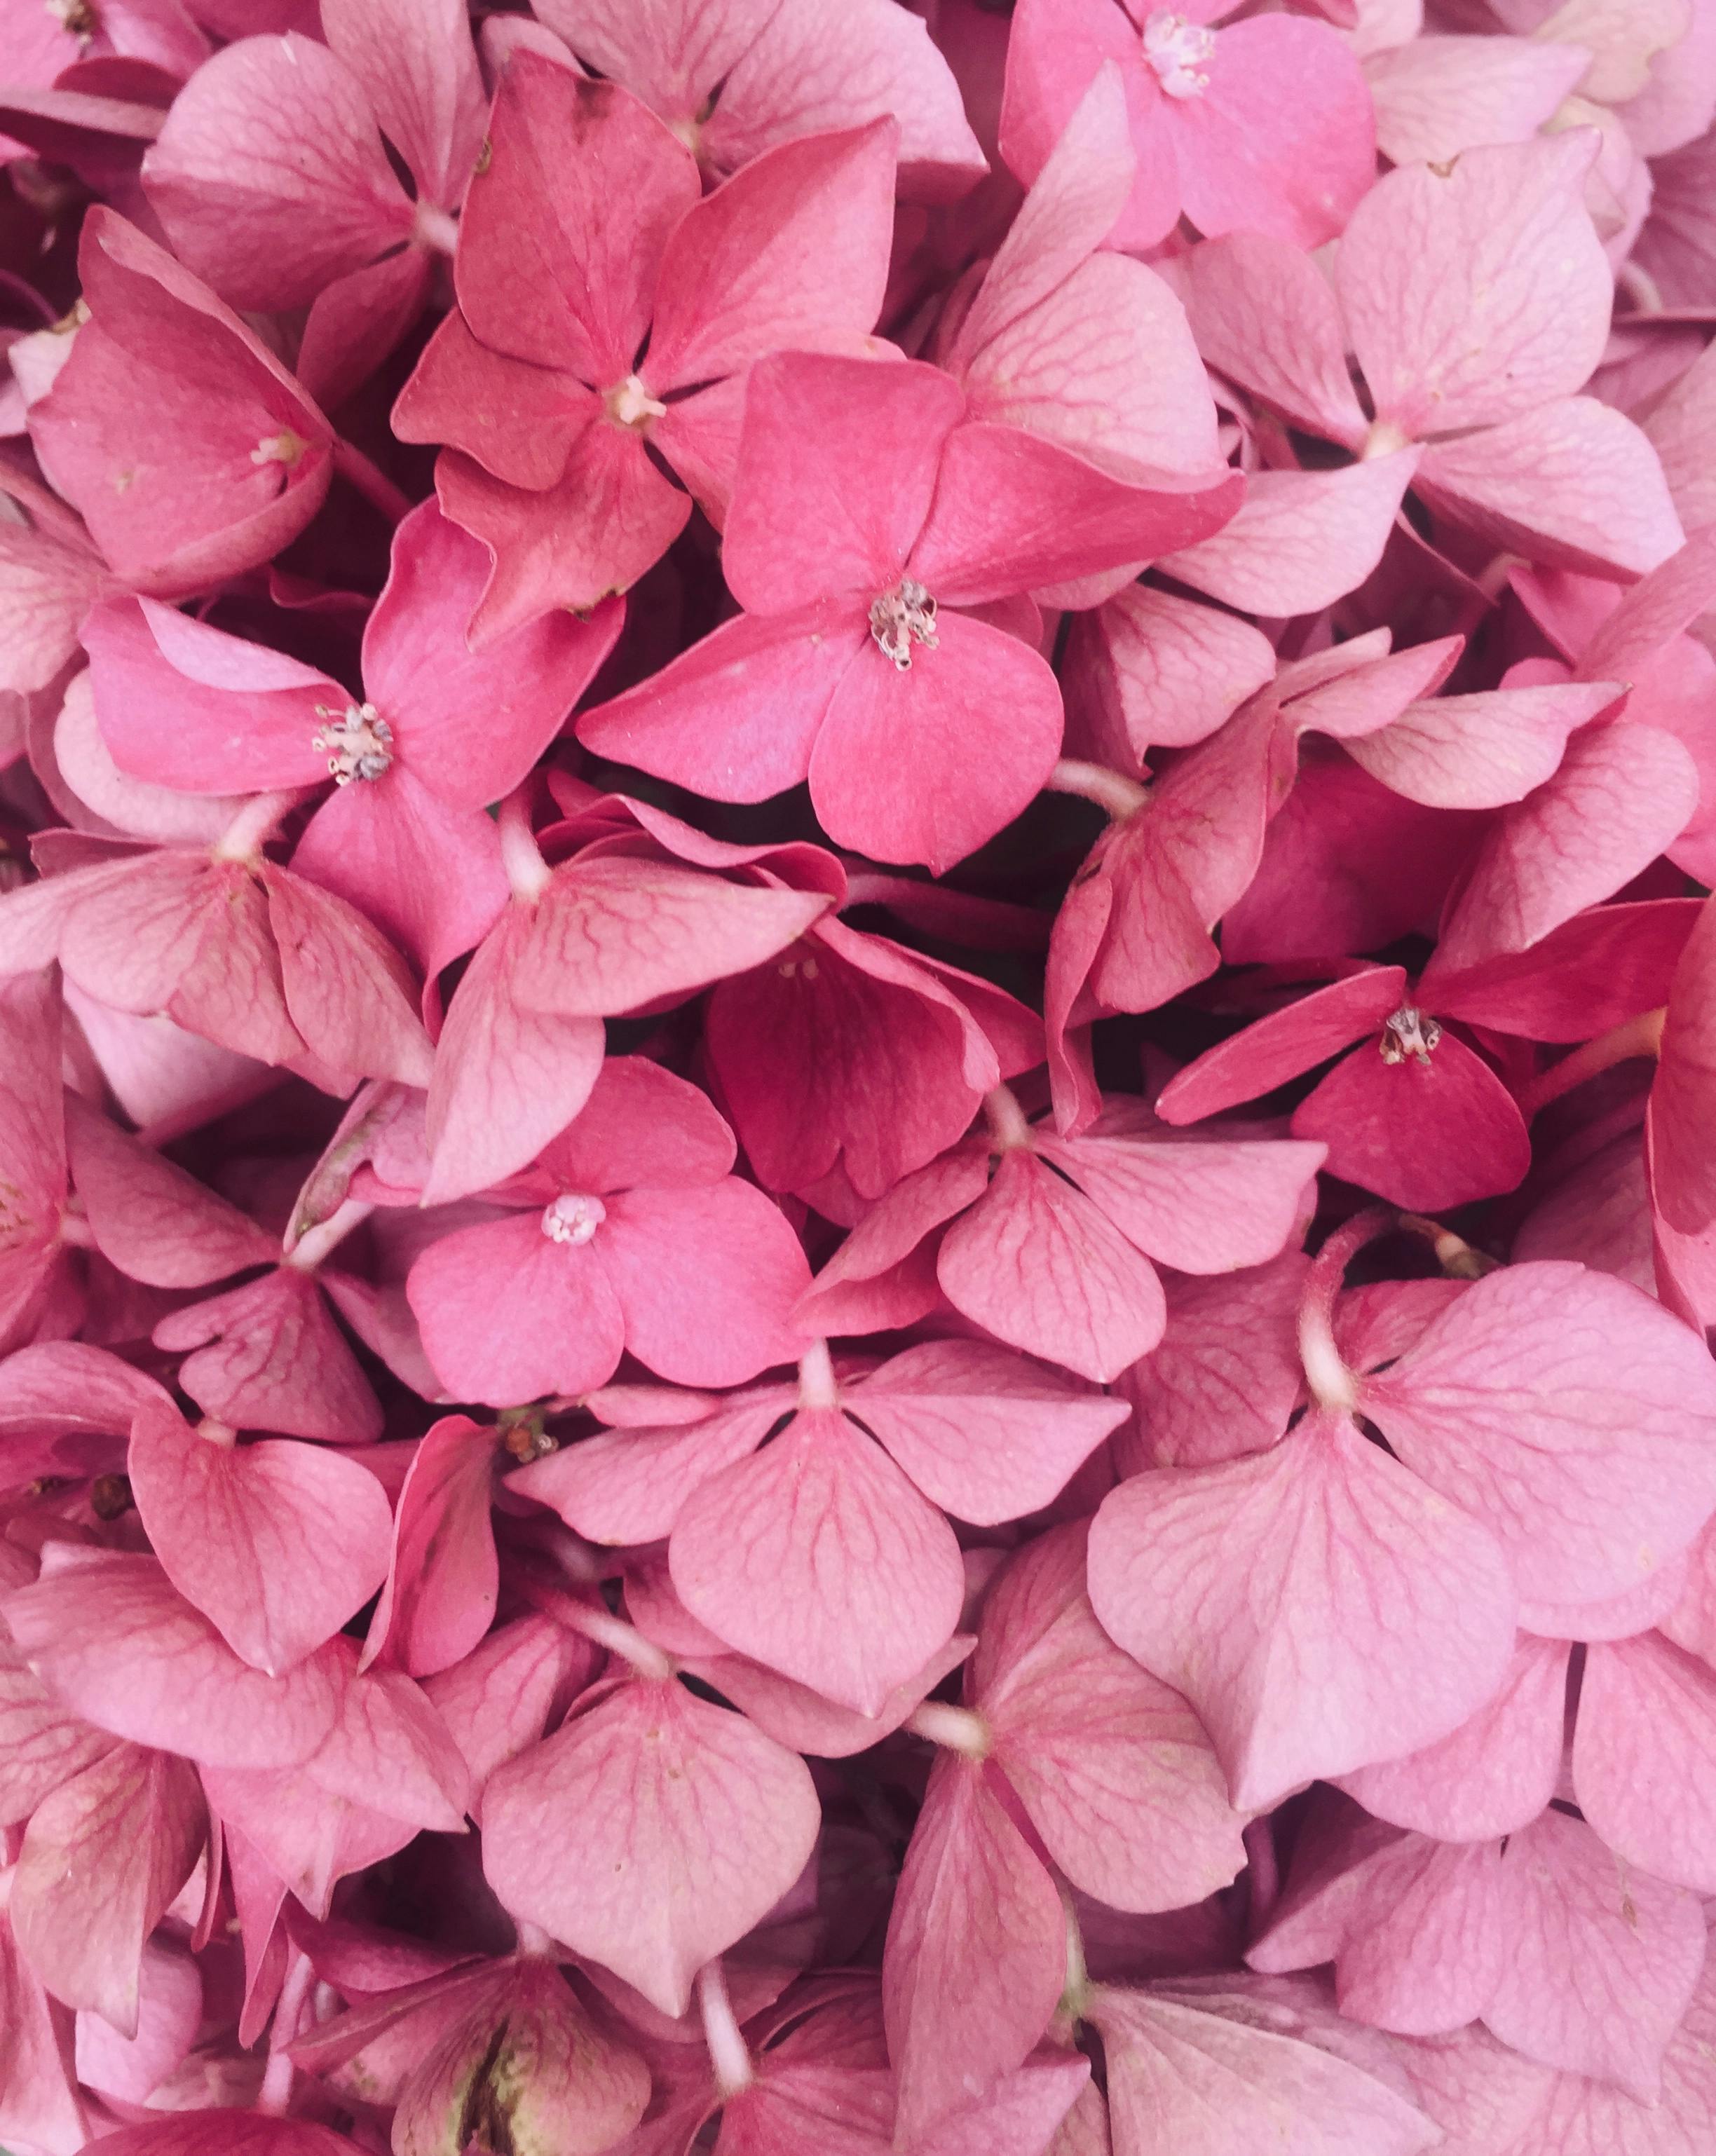 500 Pink Flowers Pictures HD  Download Free Images on Unsplash